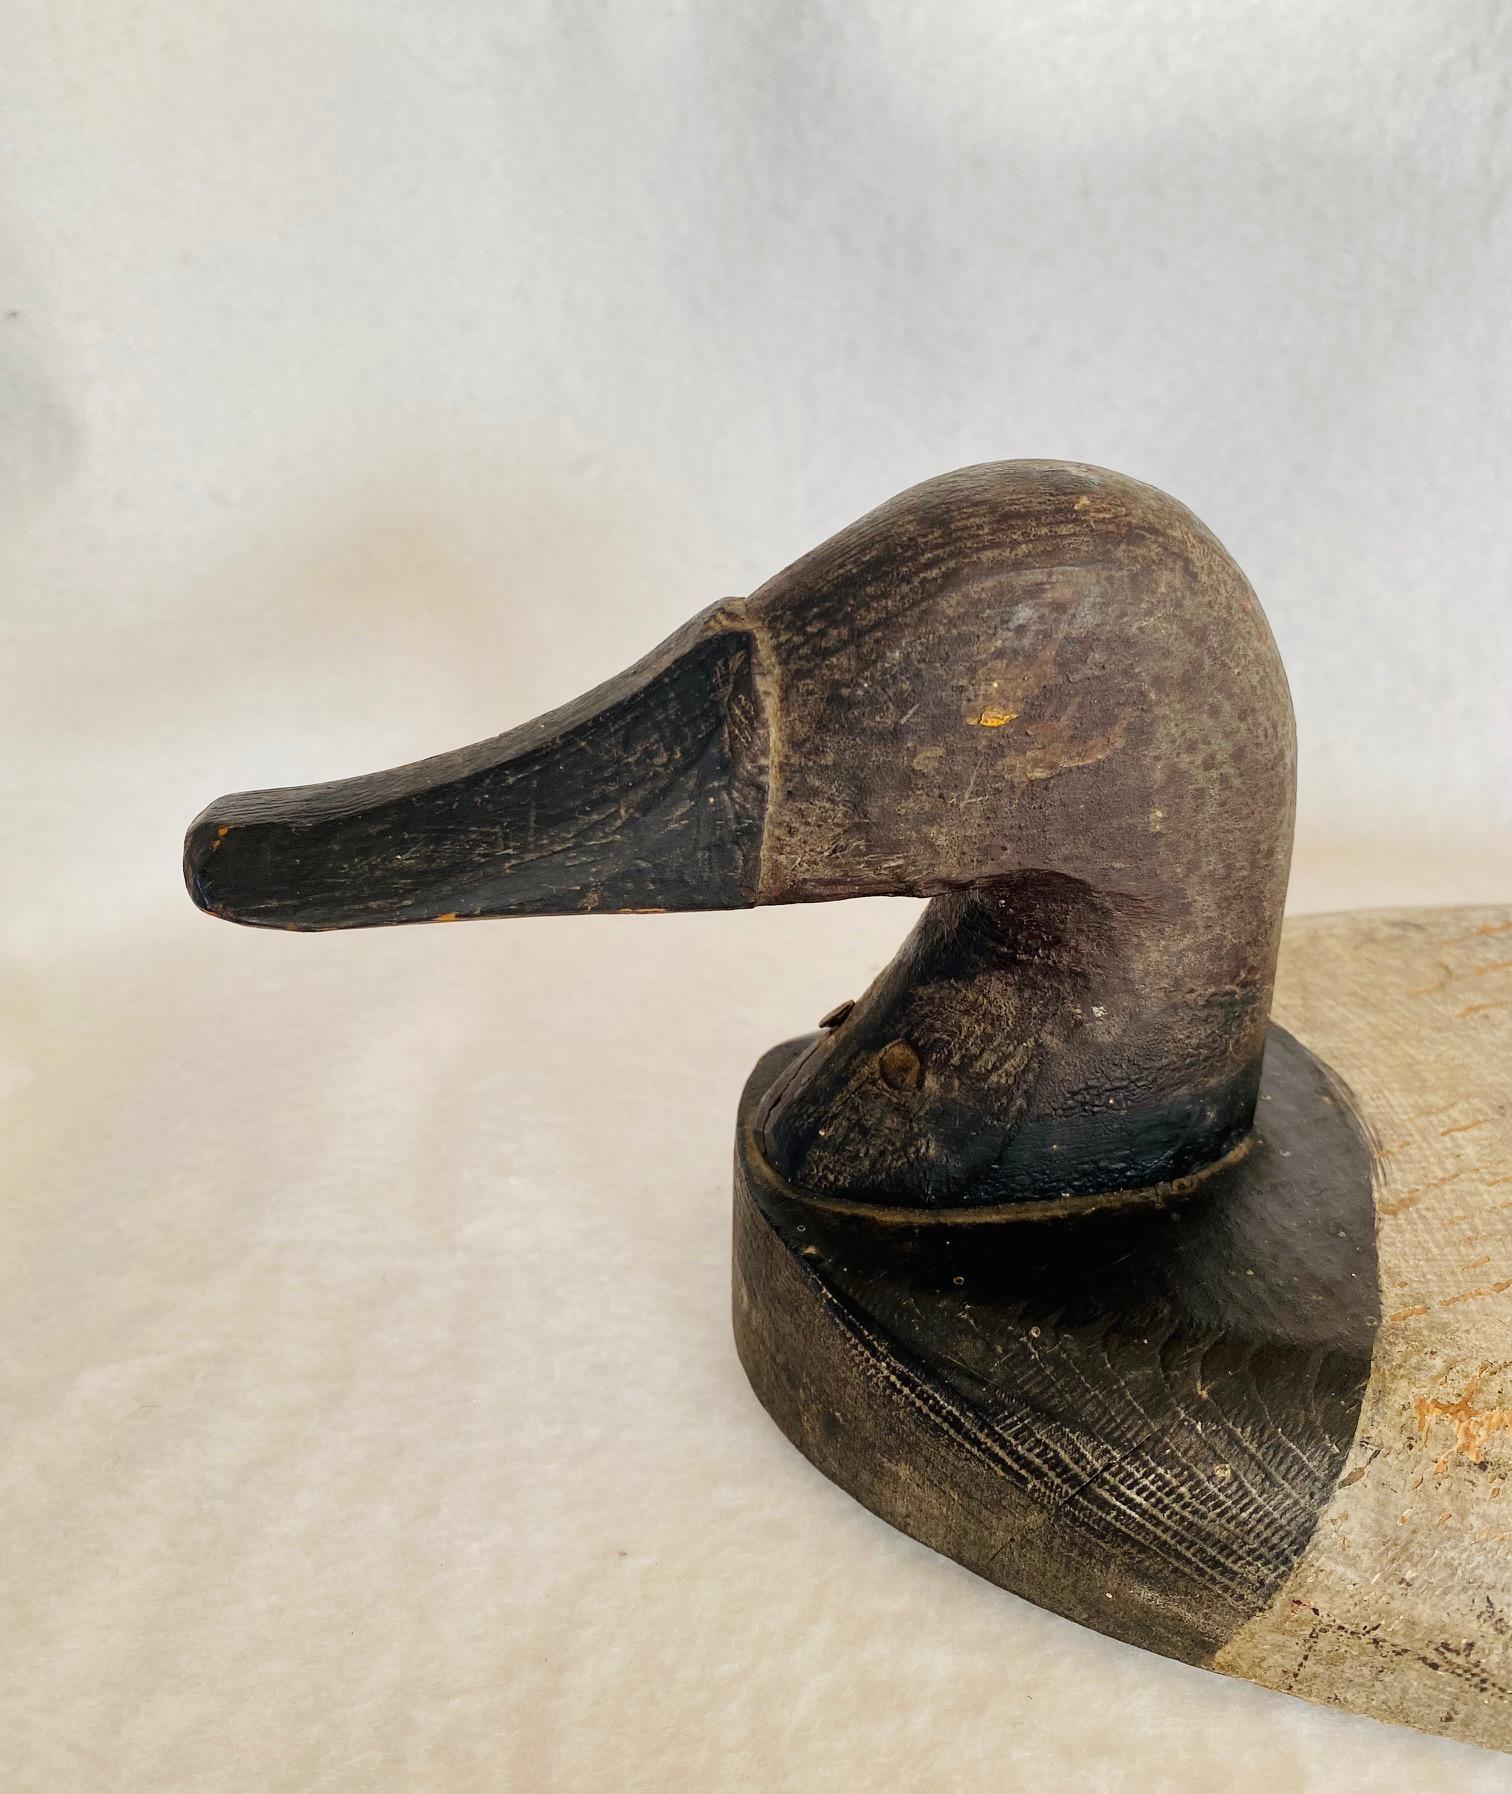 Early Chesapeake Bay Scaup Drake Sink Box Wing Decoy, circa 1940, a very shallow flat bodied decoy in original condition, original black and white paint on head and body, and painted eye (the right one remains strong, the left one has worn away). In